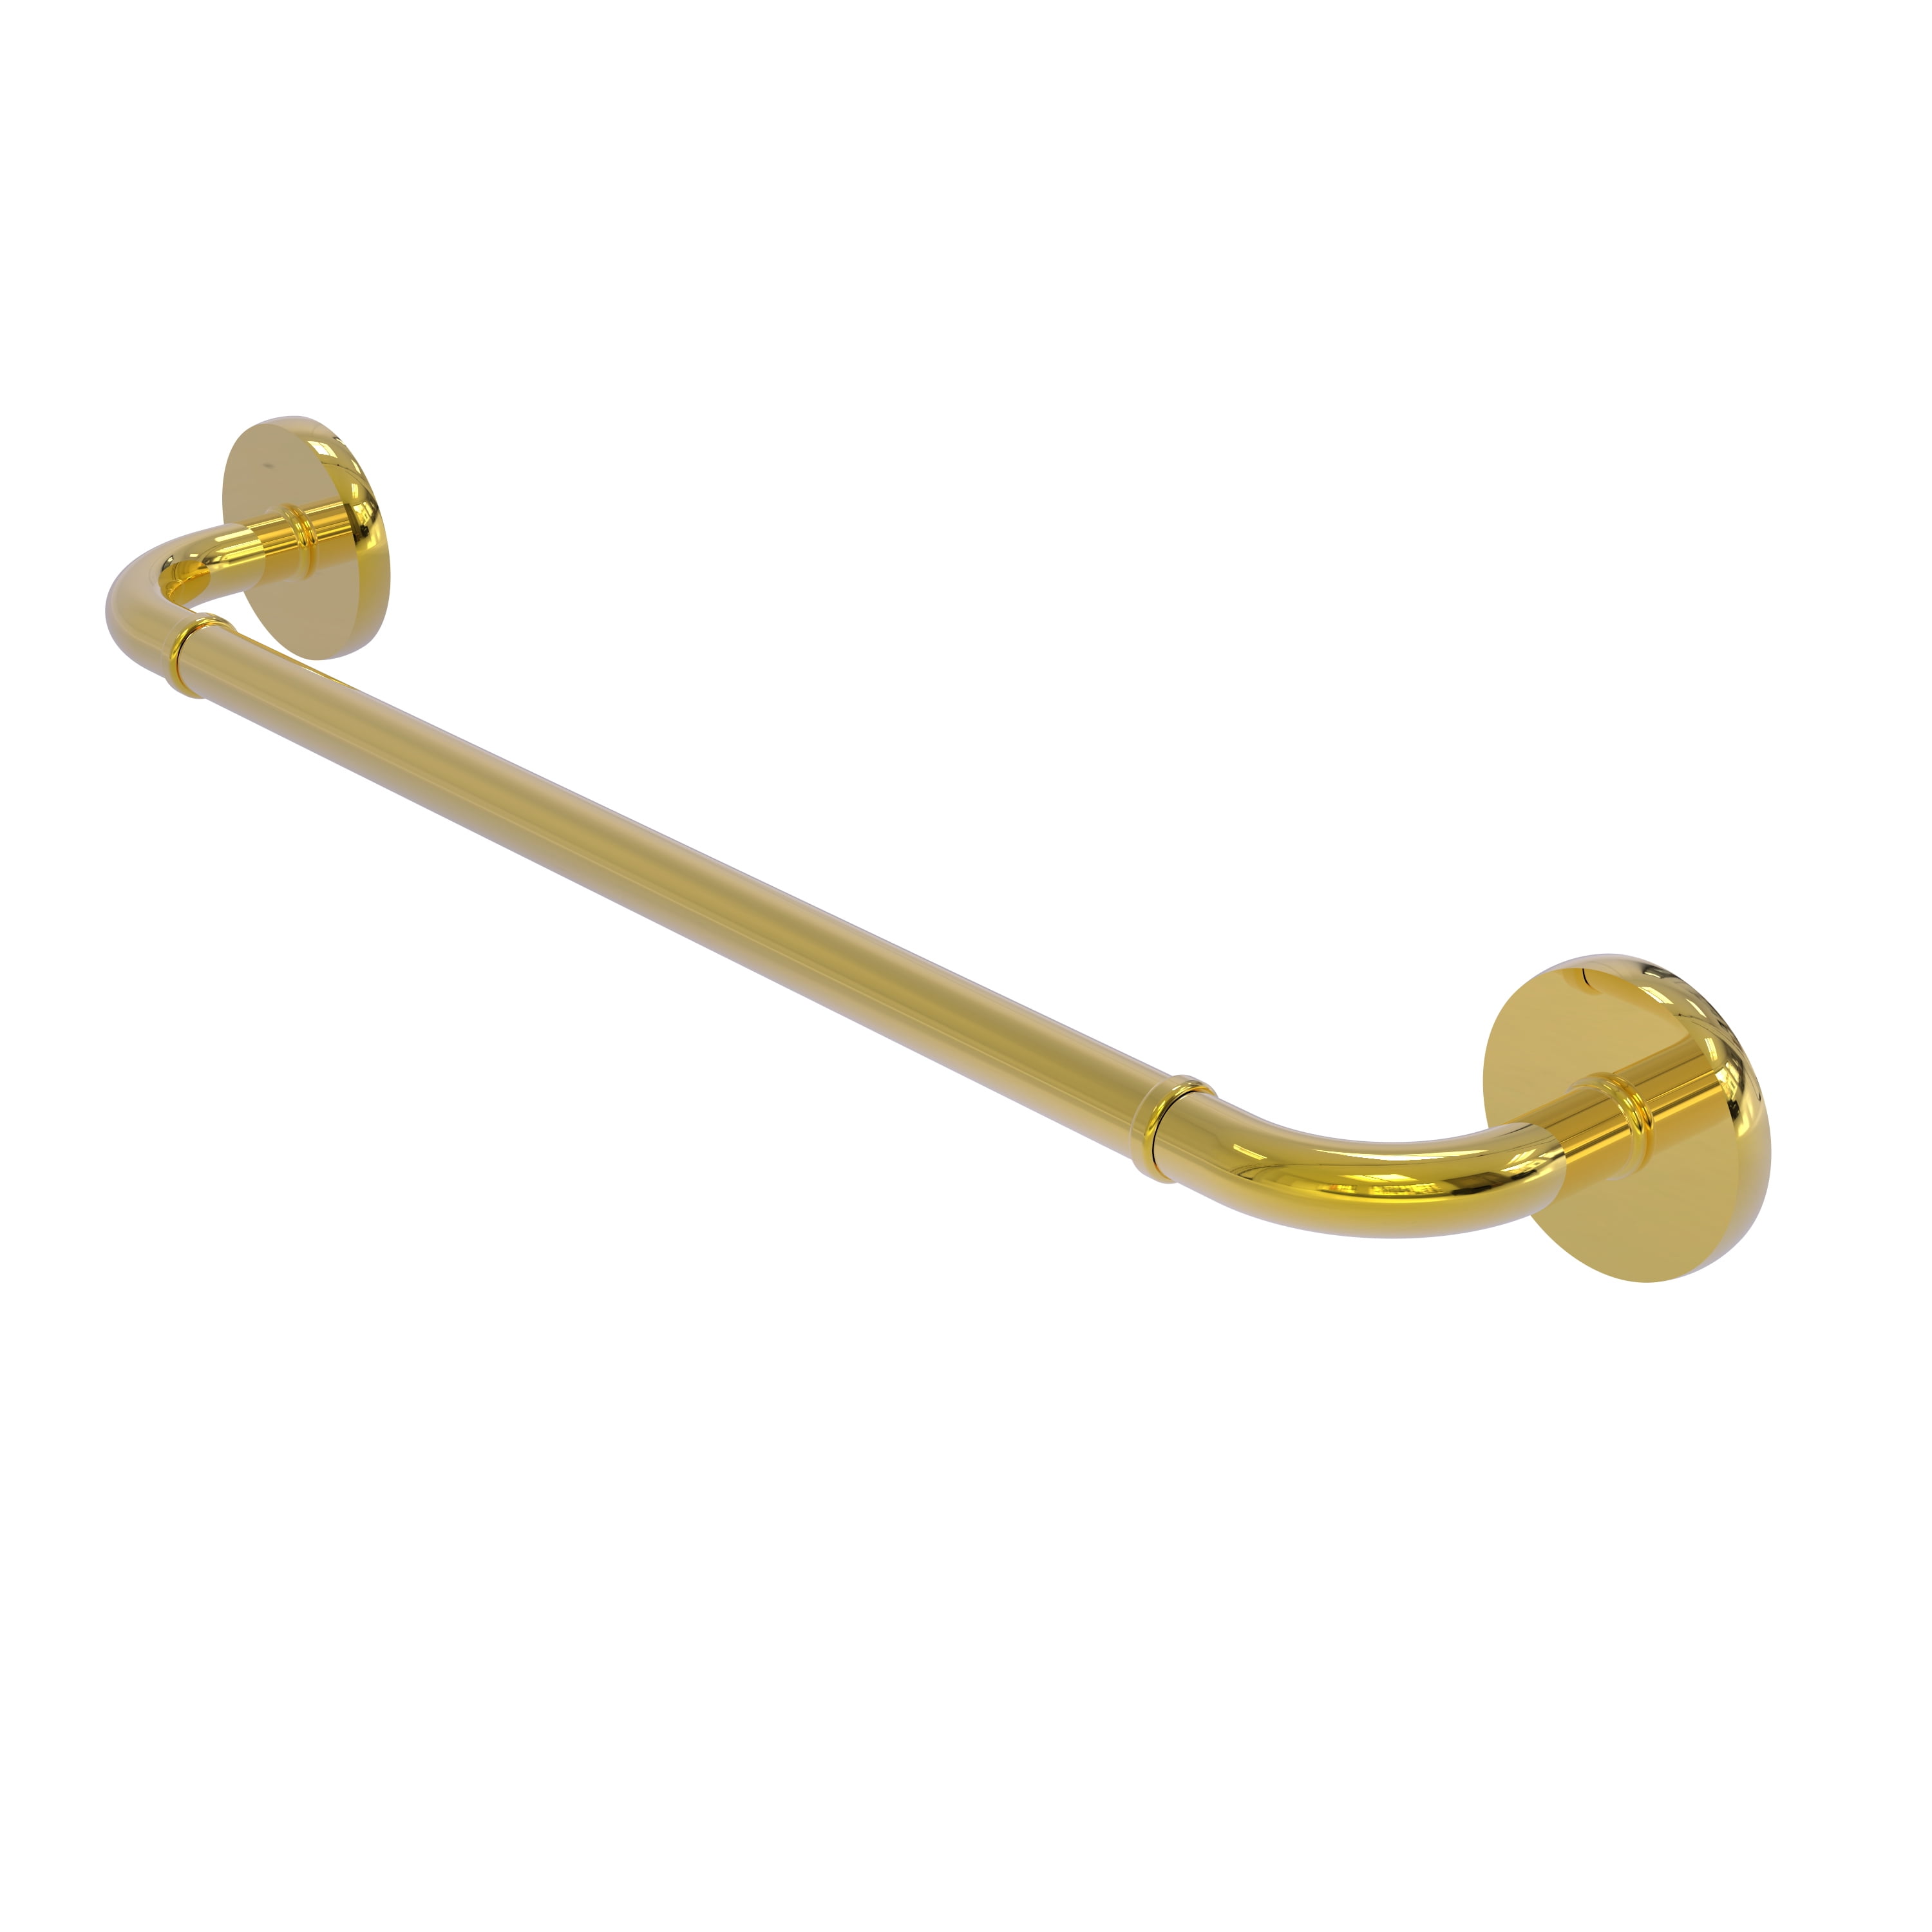 Allied Brass P-200-24-TB-ABZ Pipeline Collection 24 Inch Towel Bar 24 Antique Bronze